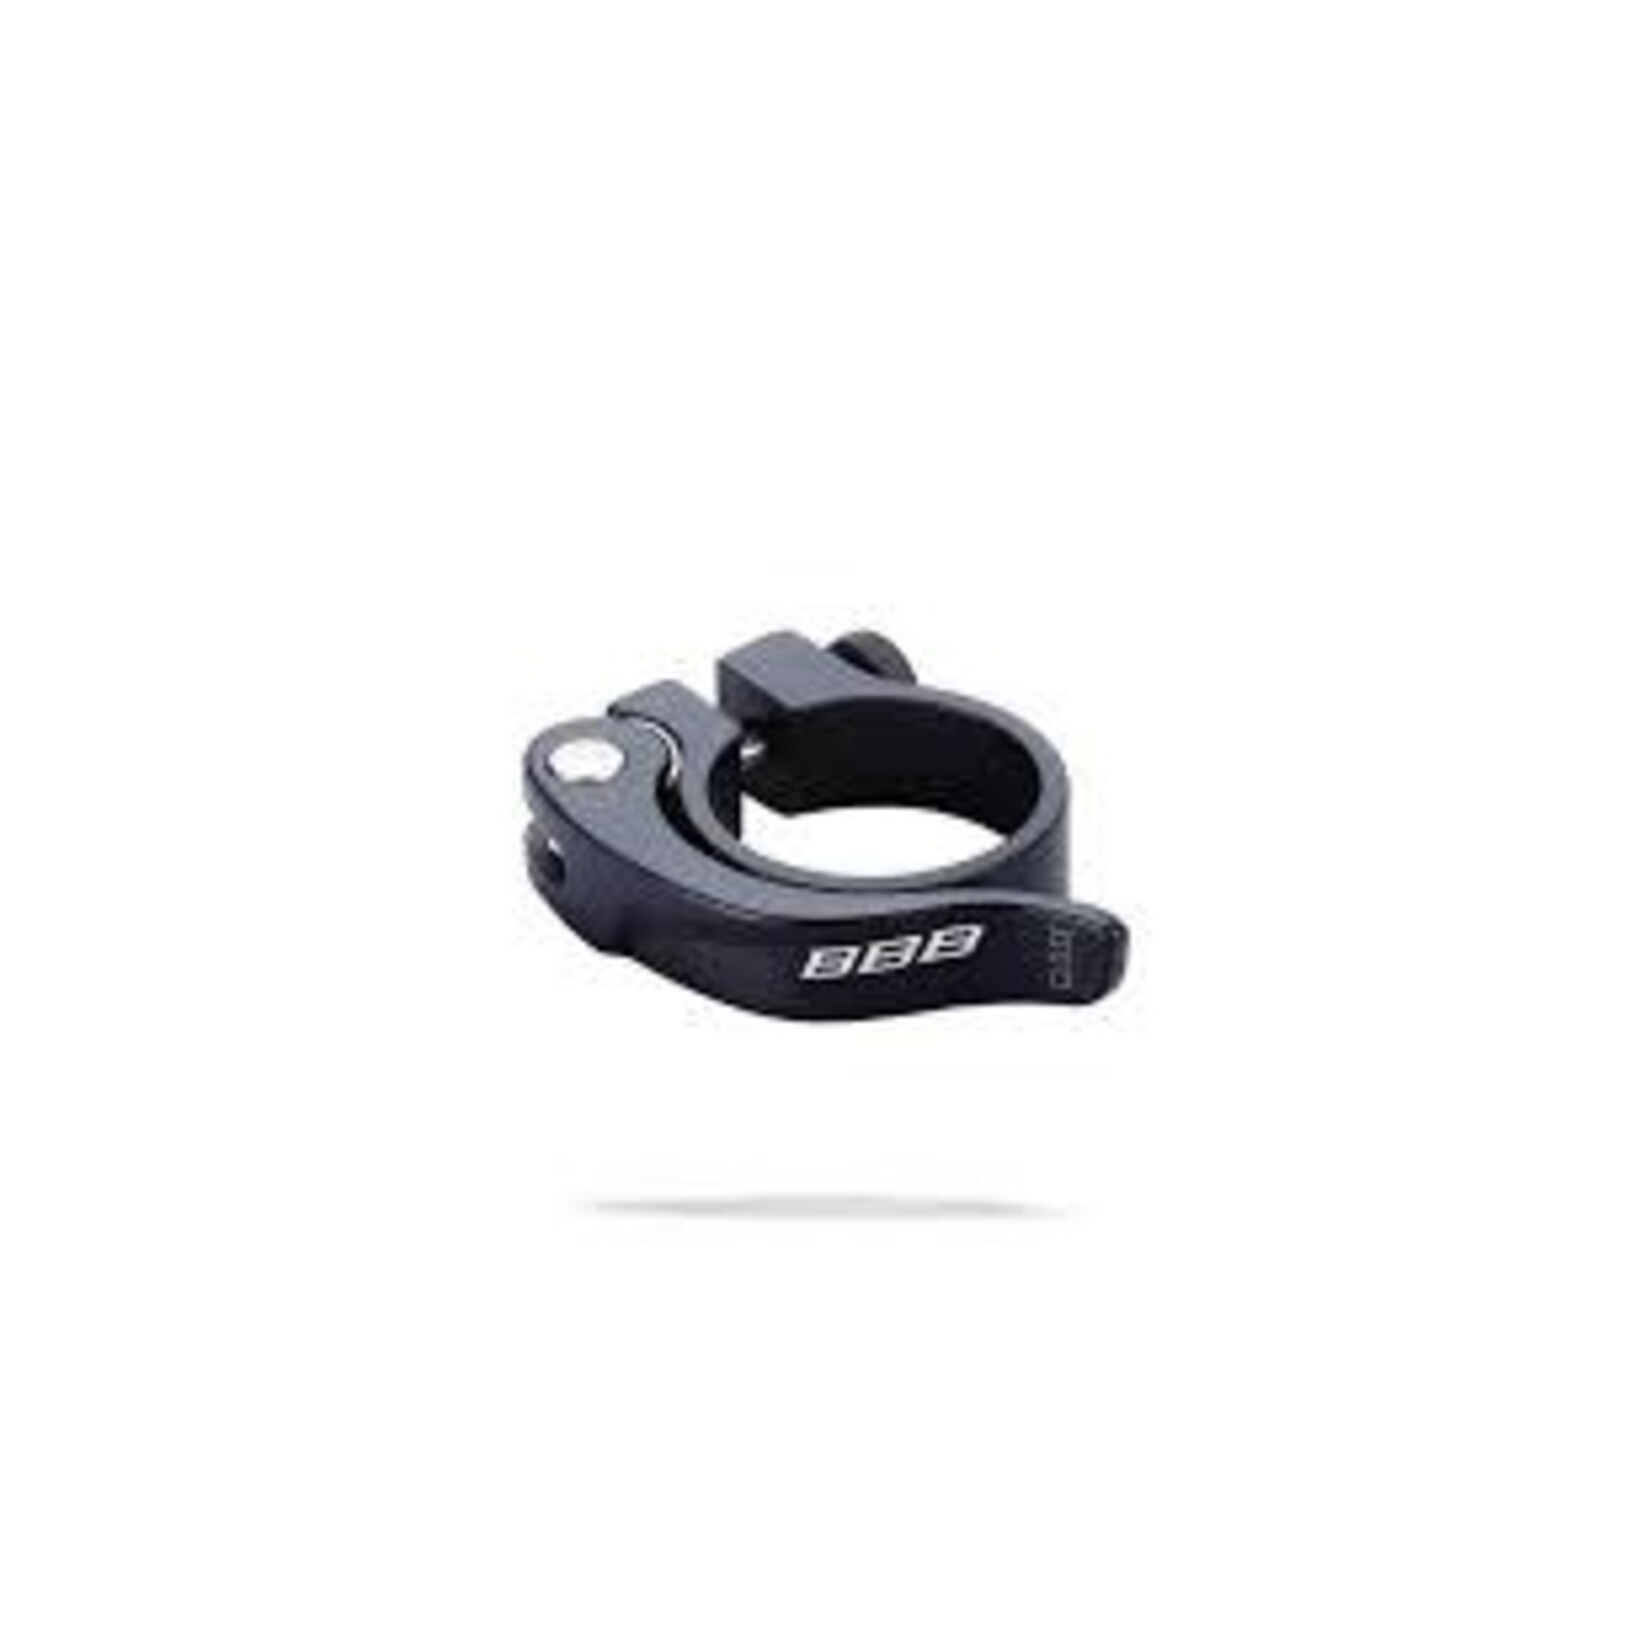 BBB LEVER SEATCLAMP 28.6MM